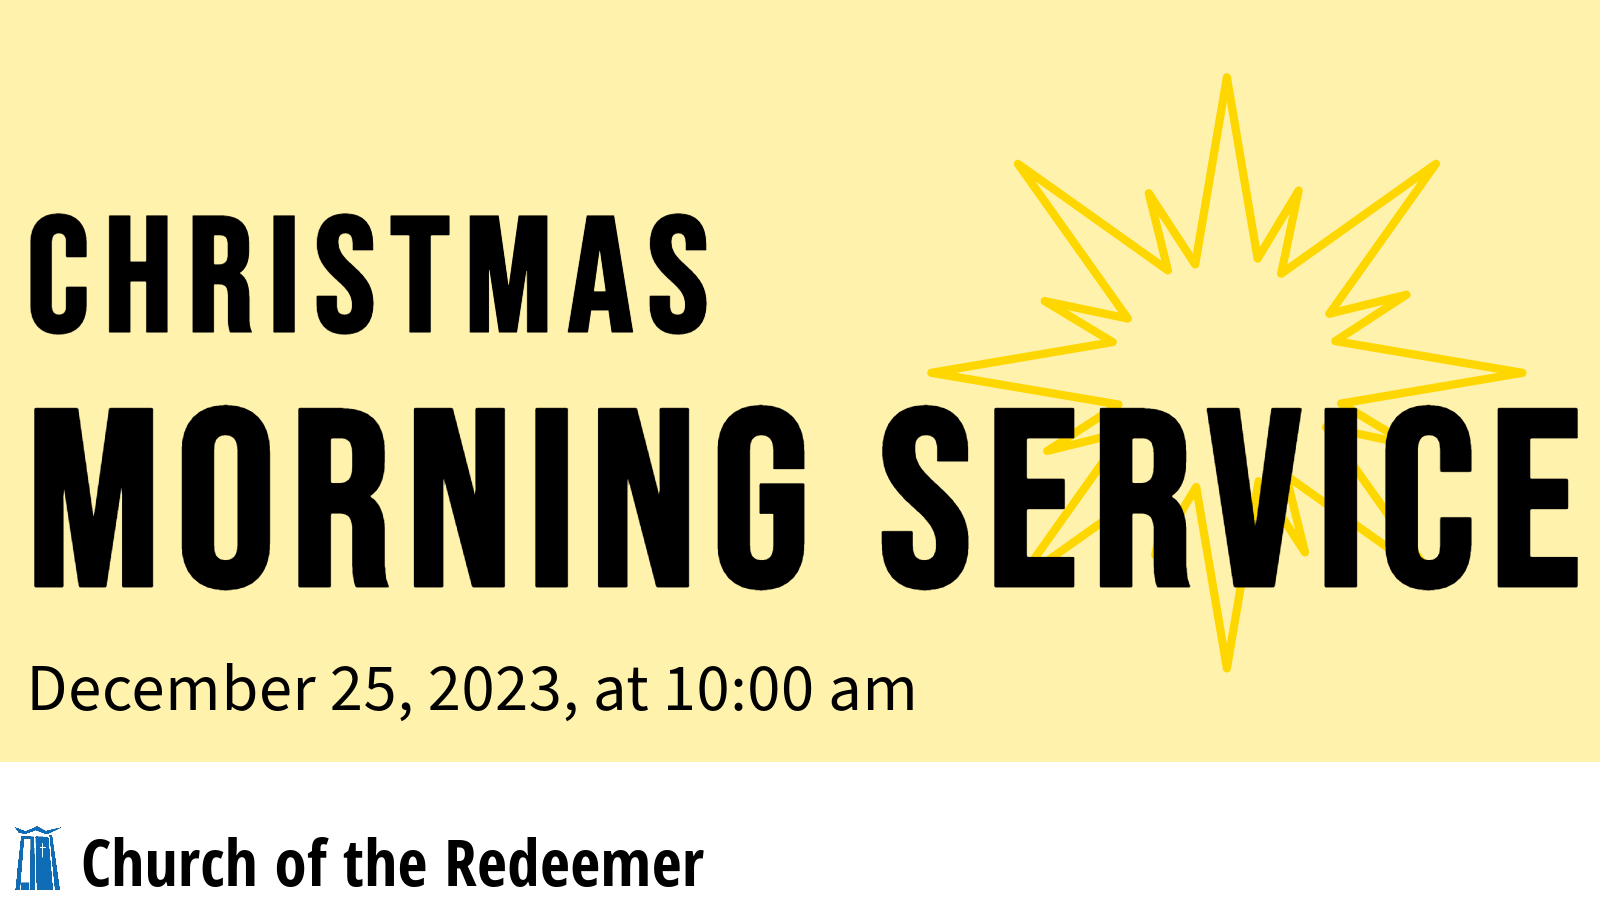 Christmas Morning Service with music at 10:00 am at Church of the Redeemer on December 25, 2023.